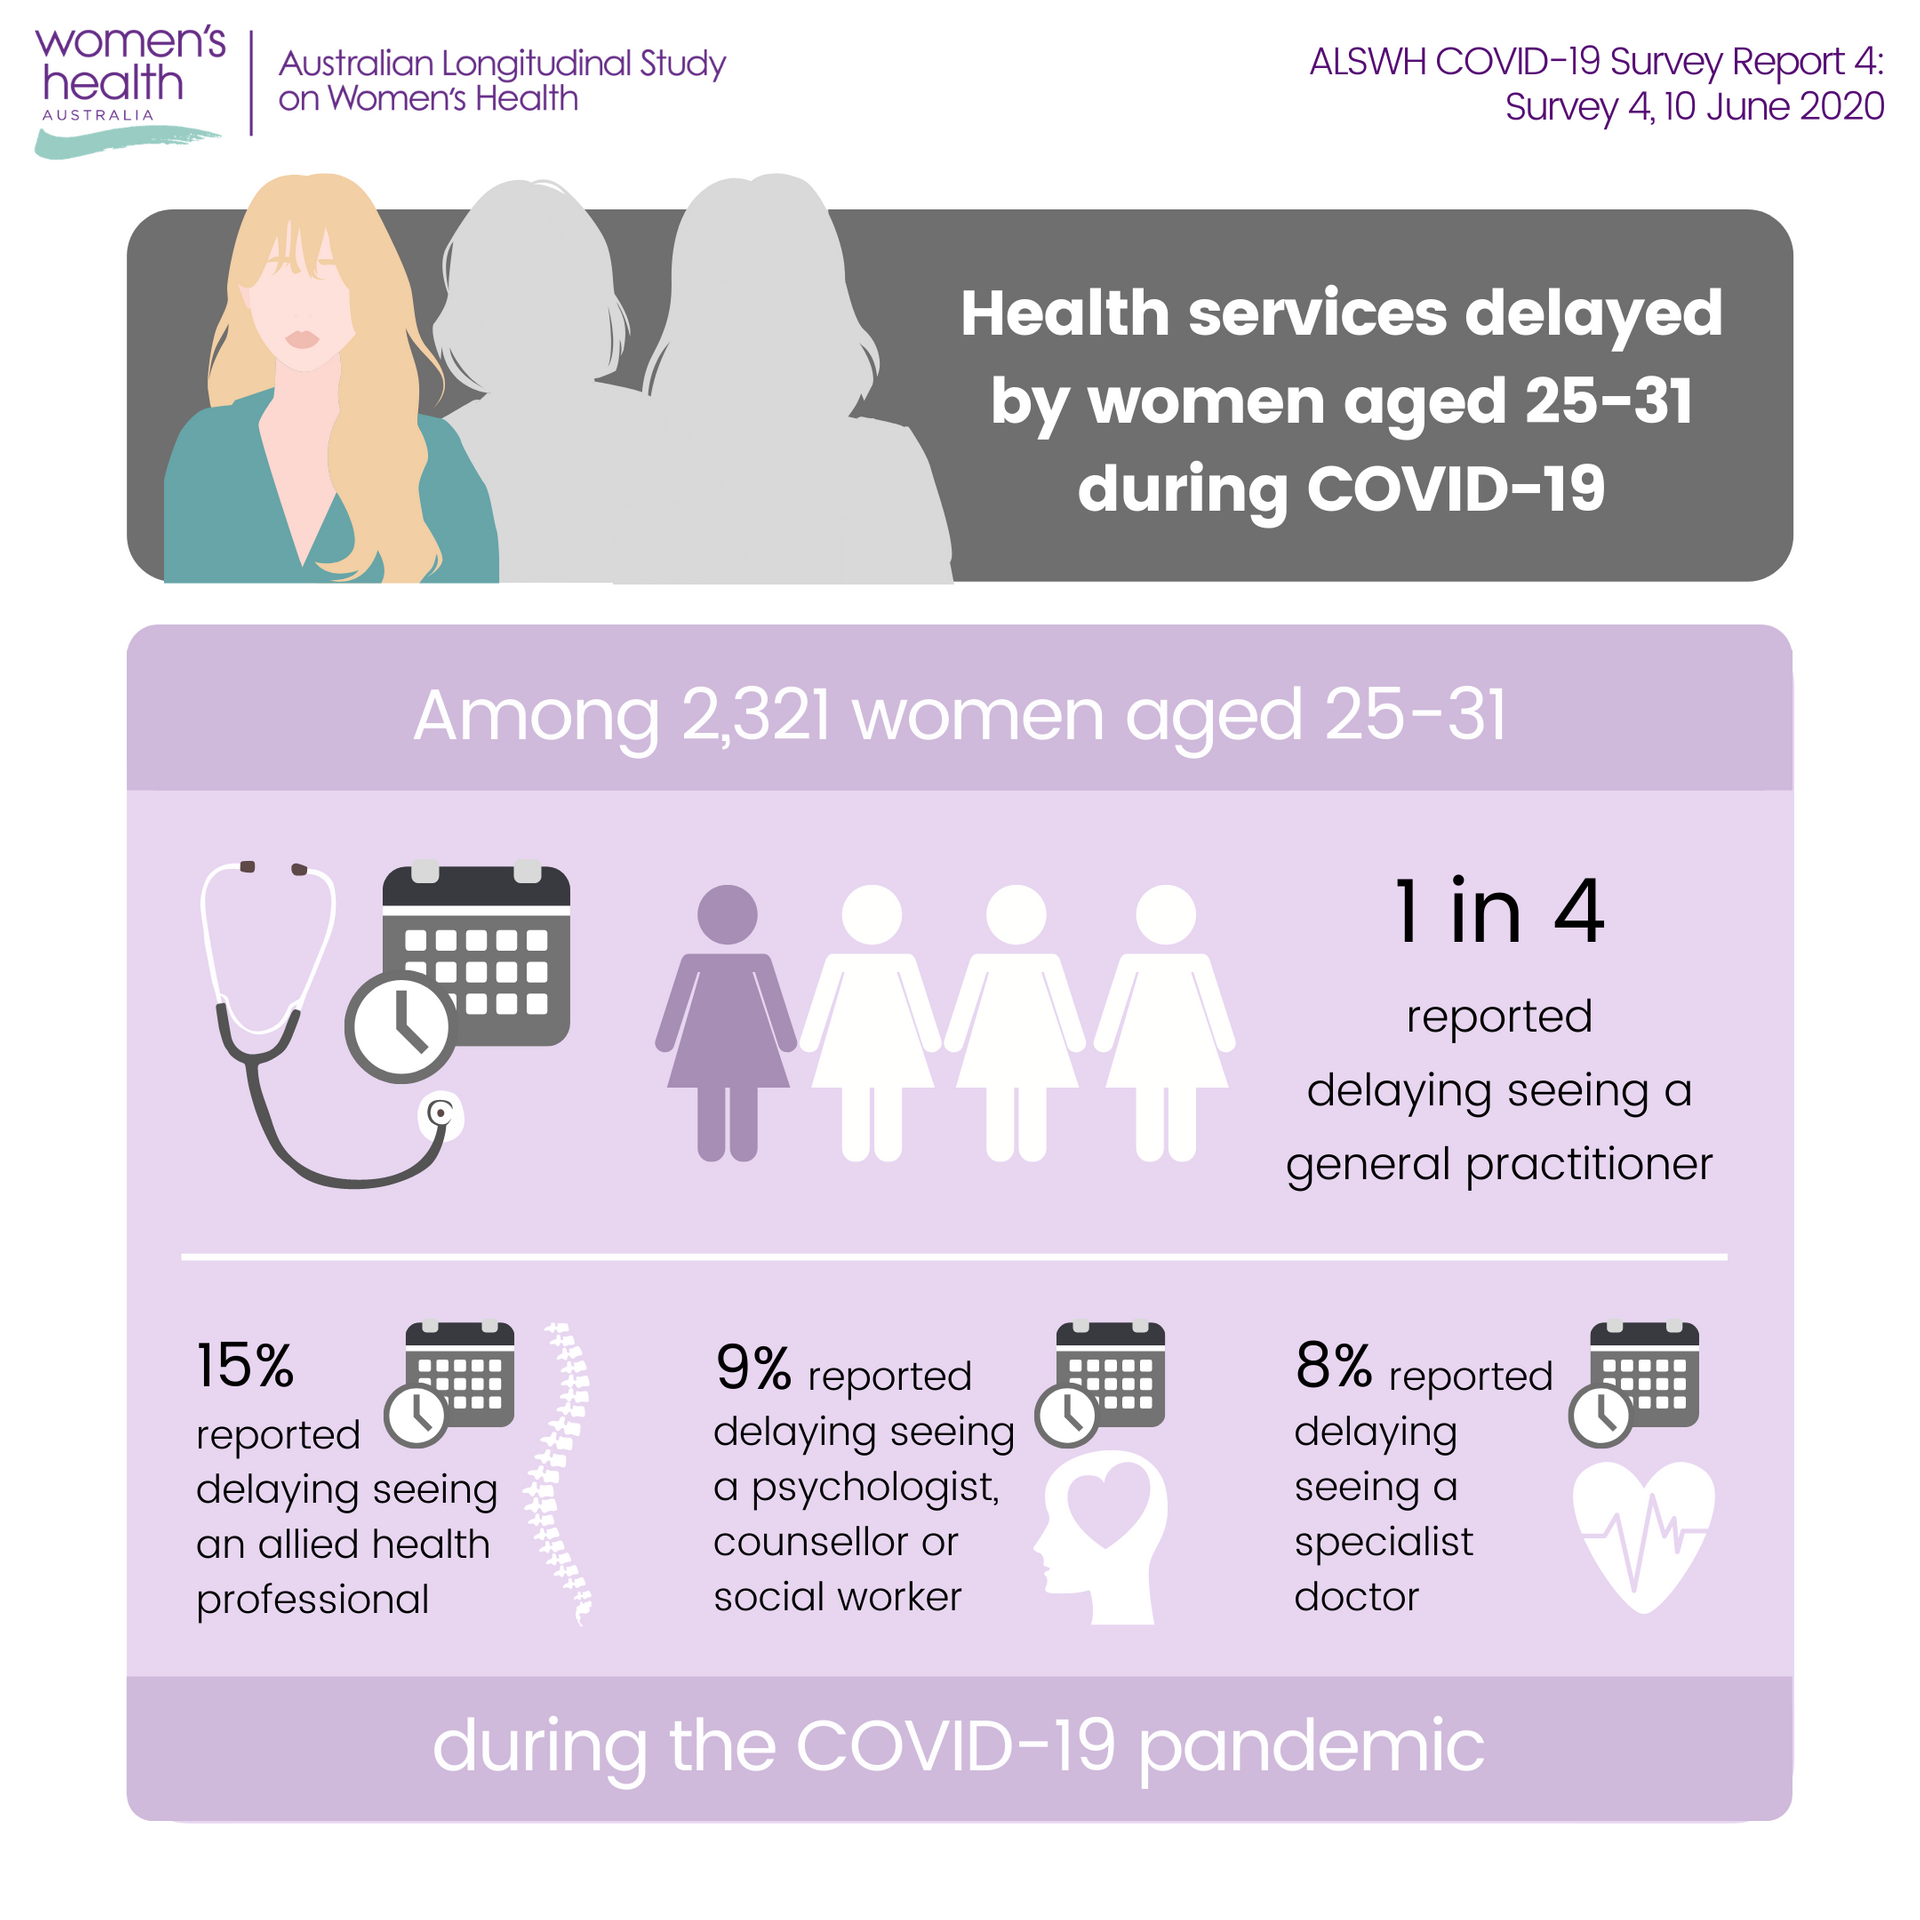 Infographic for ALSWH COVID-19 Survey 4 - 1 in 4 women aged 25-31 delayed seeing a general practitioner